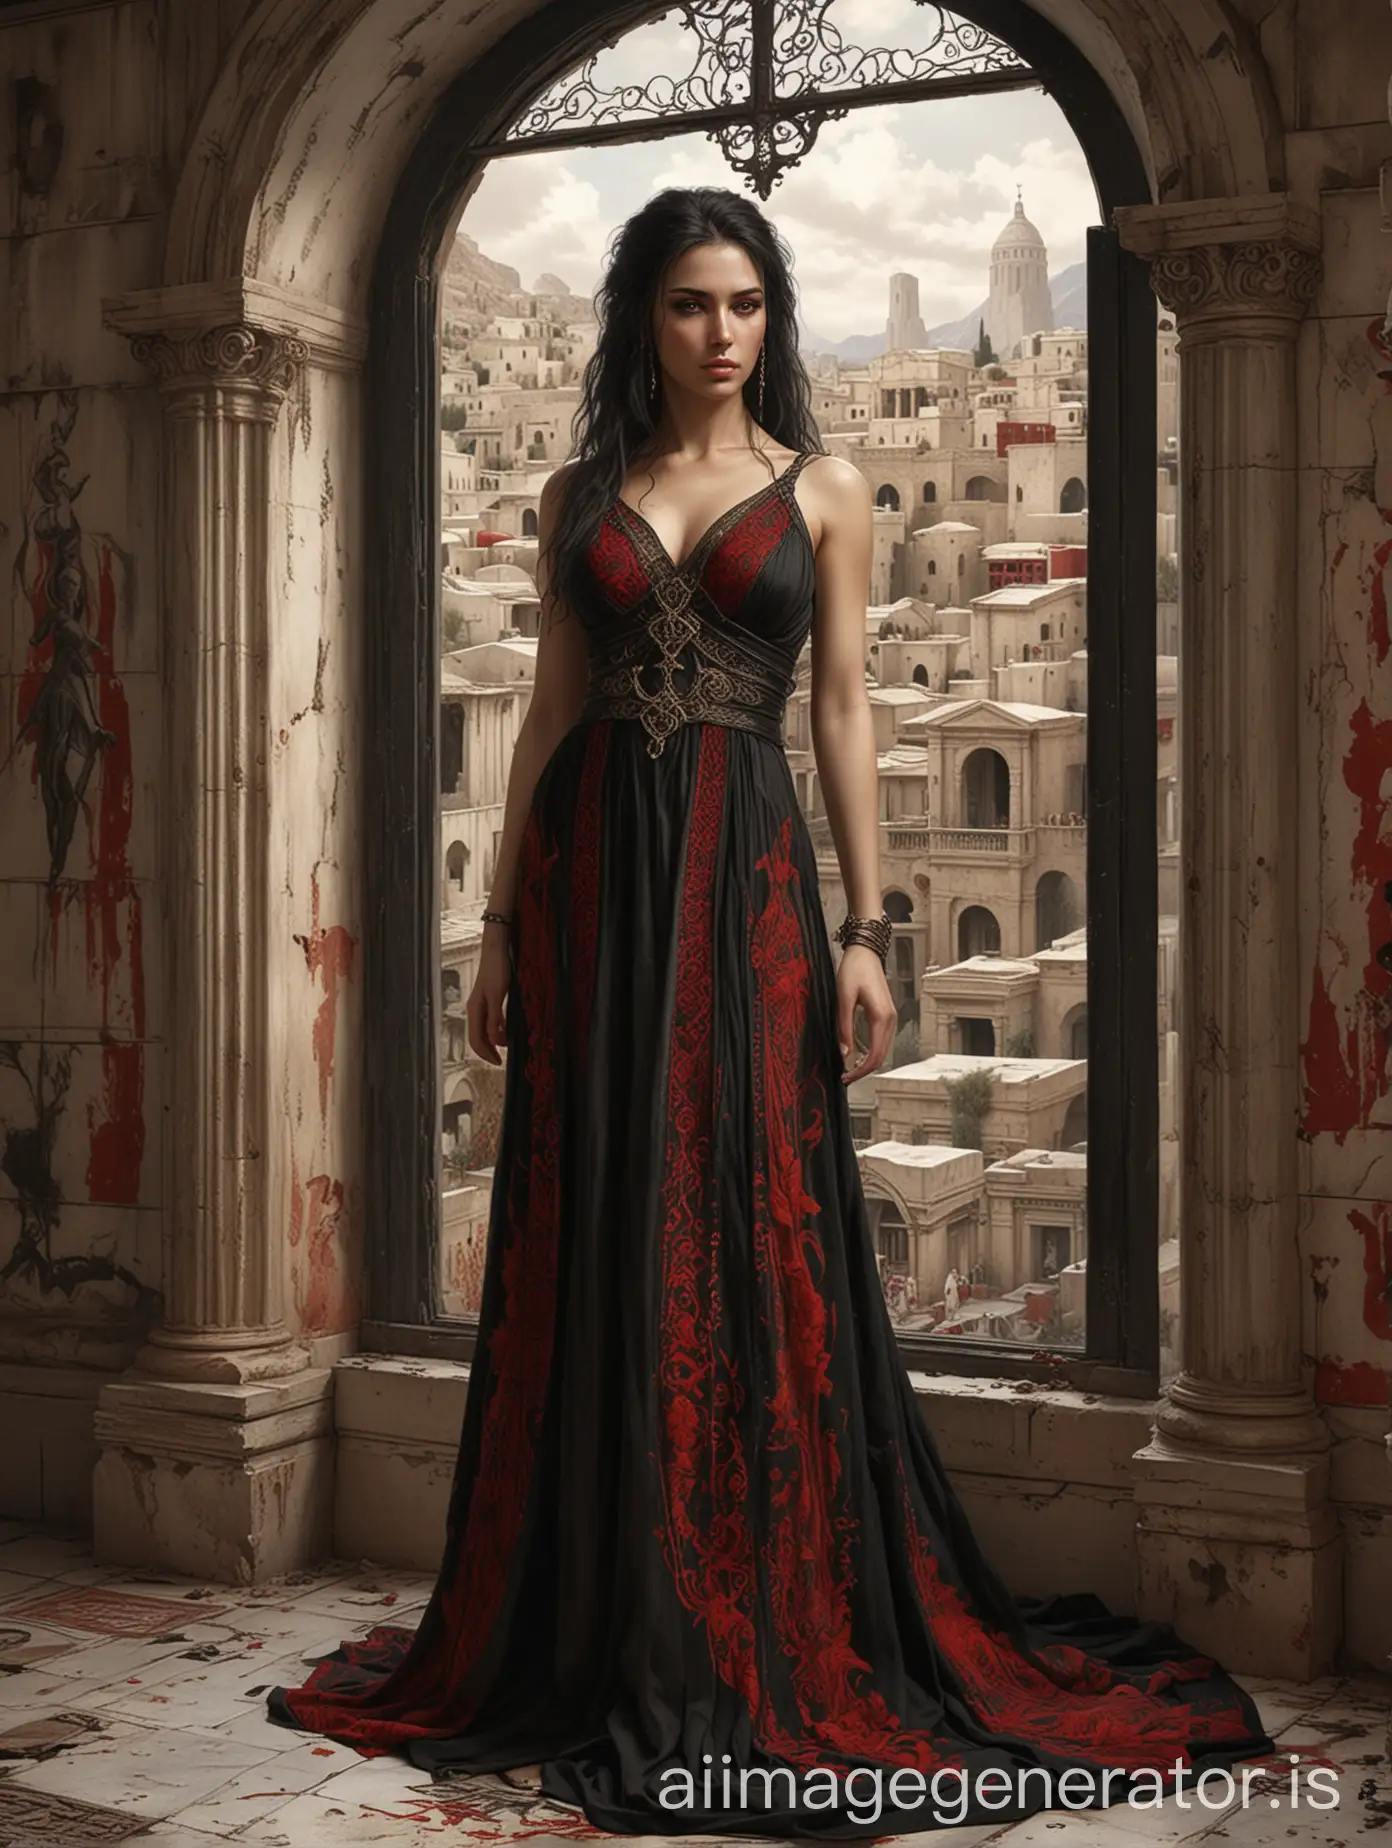 rhaenyra face, fullbody, luis royo darart, intricate ancient greece style black gown with crimson embroidery, ancient cityscape in the window, brickwall room, carpeted floor